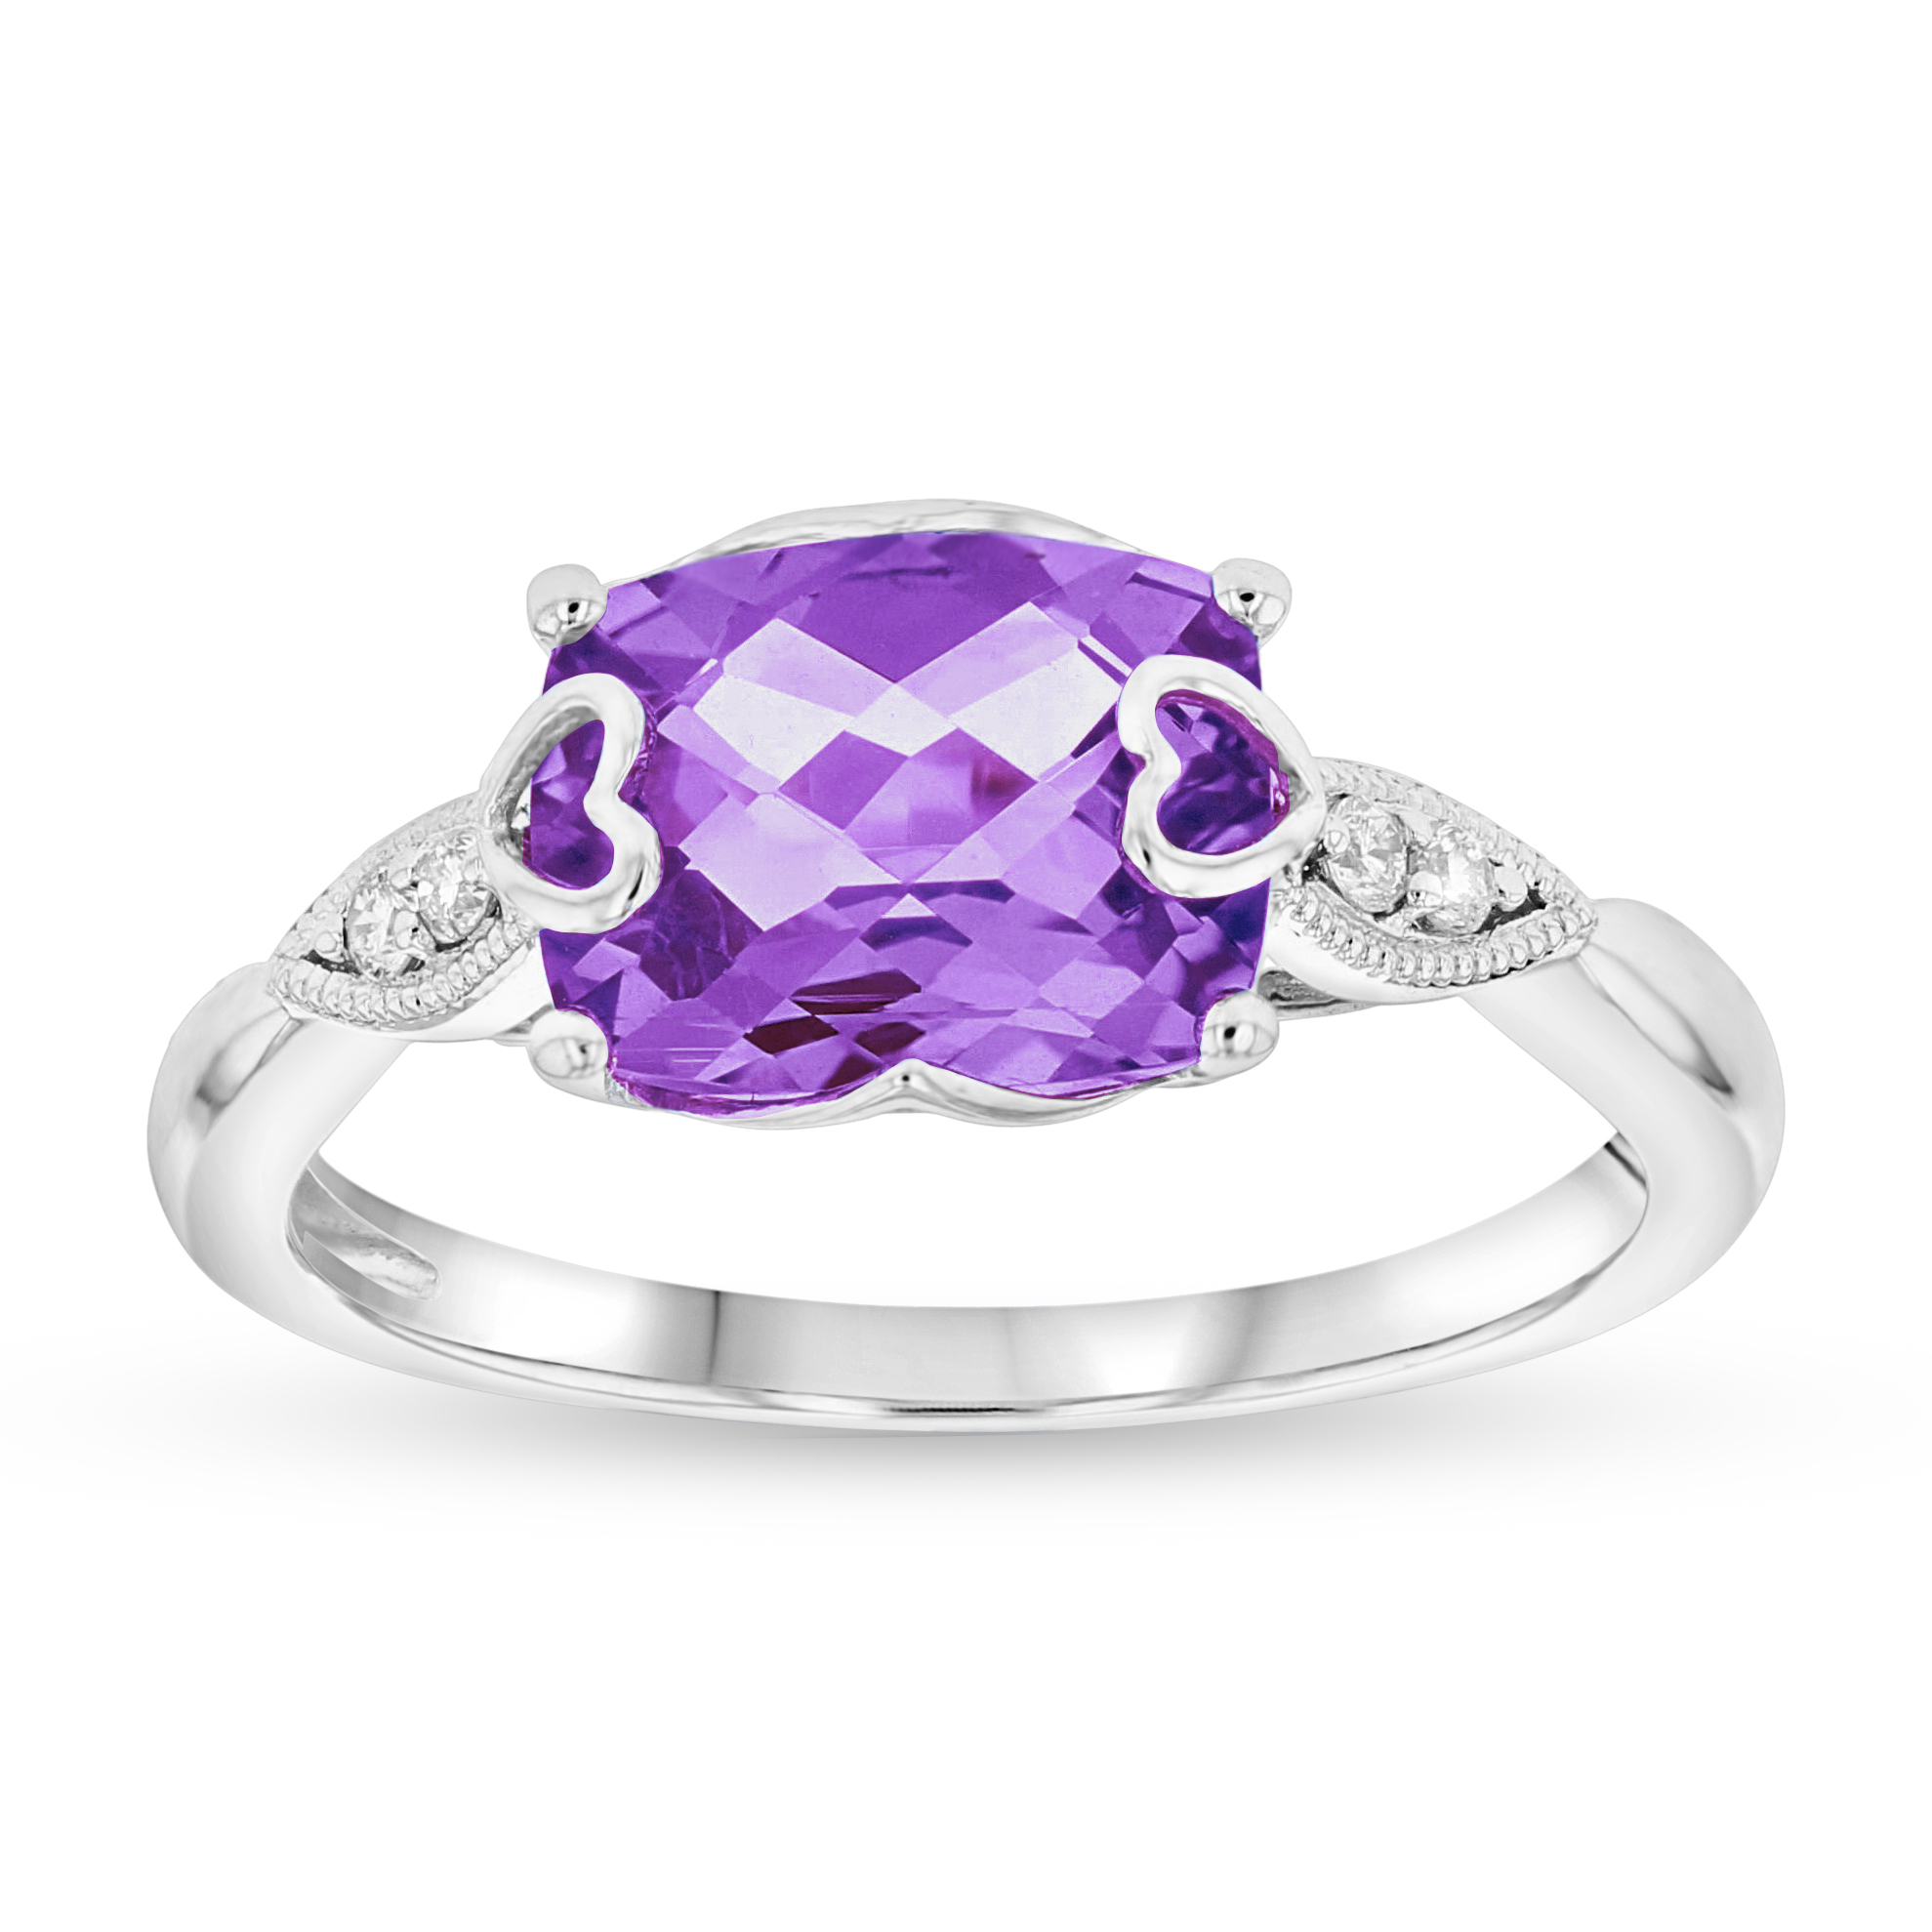 View 1.75ctw Amethyst and Diamond Ring in 14k White Gold